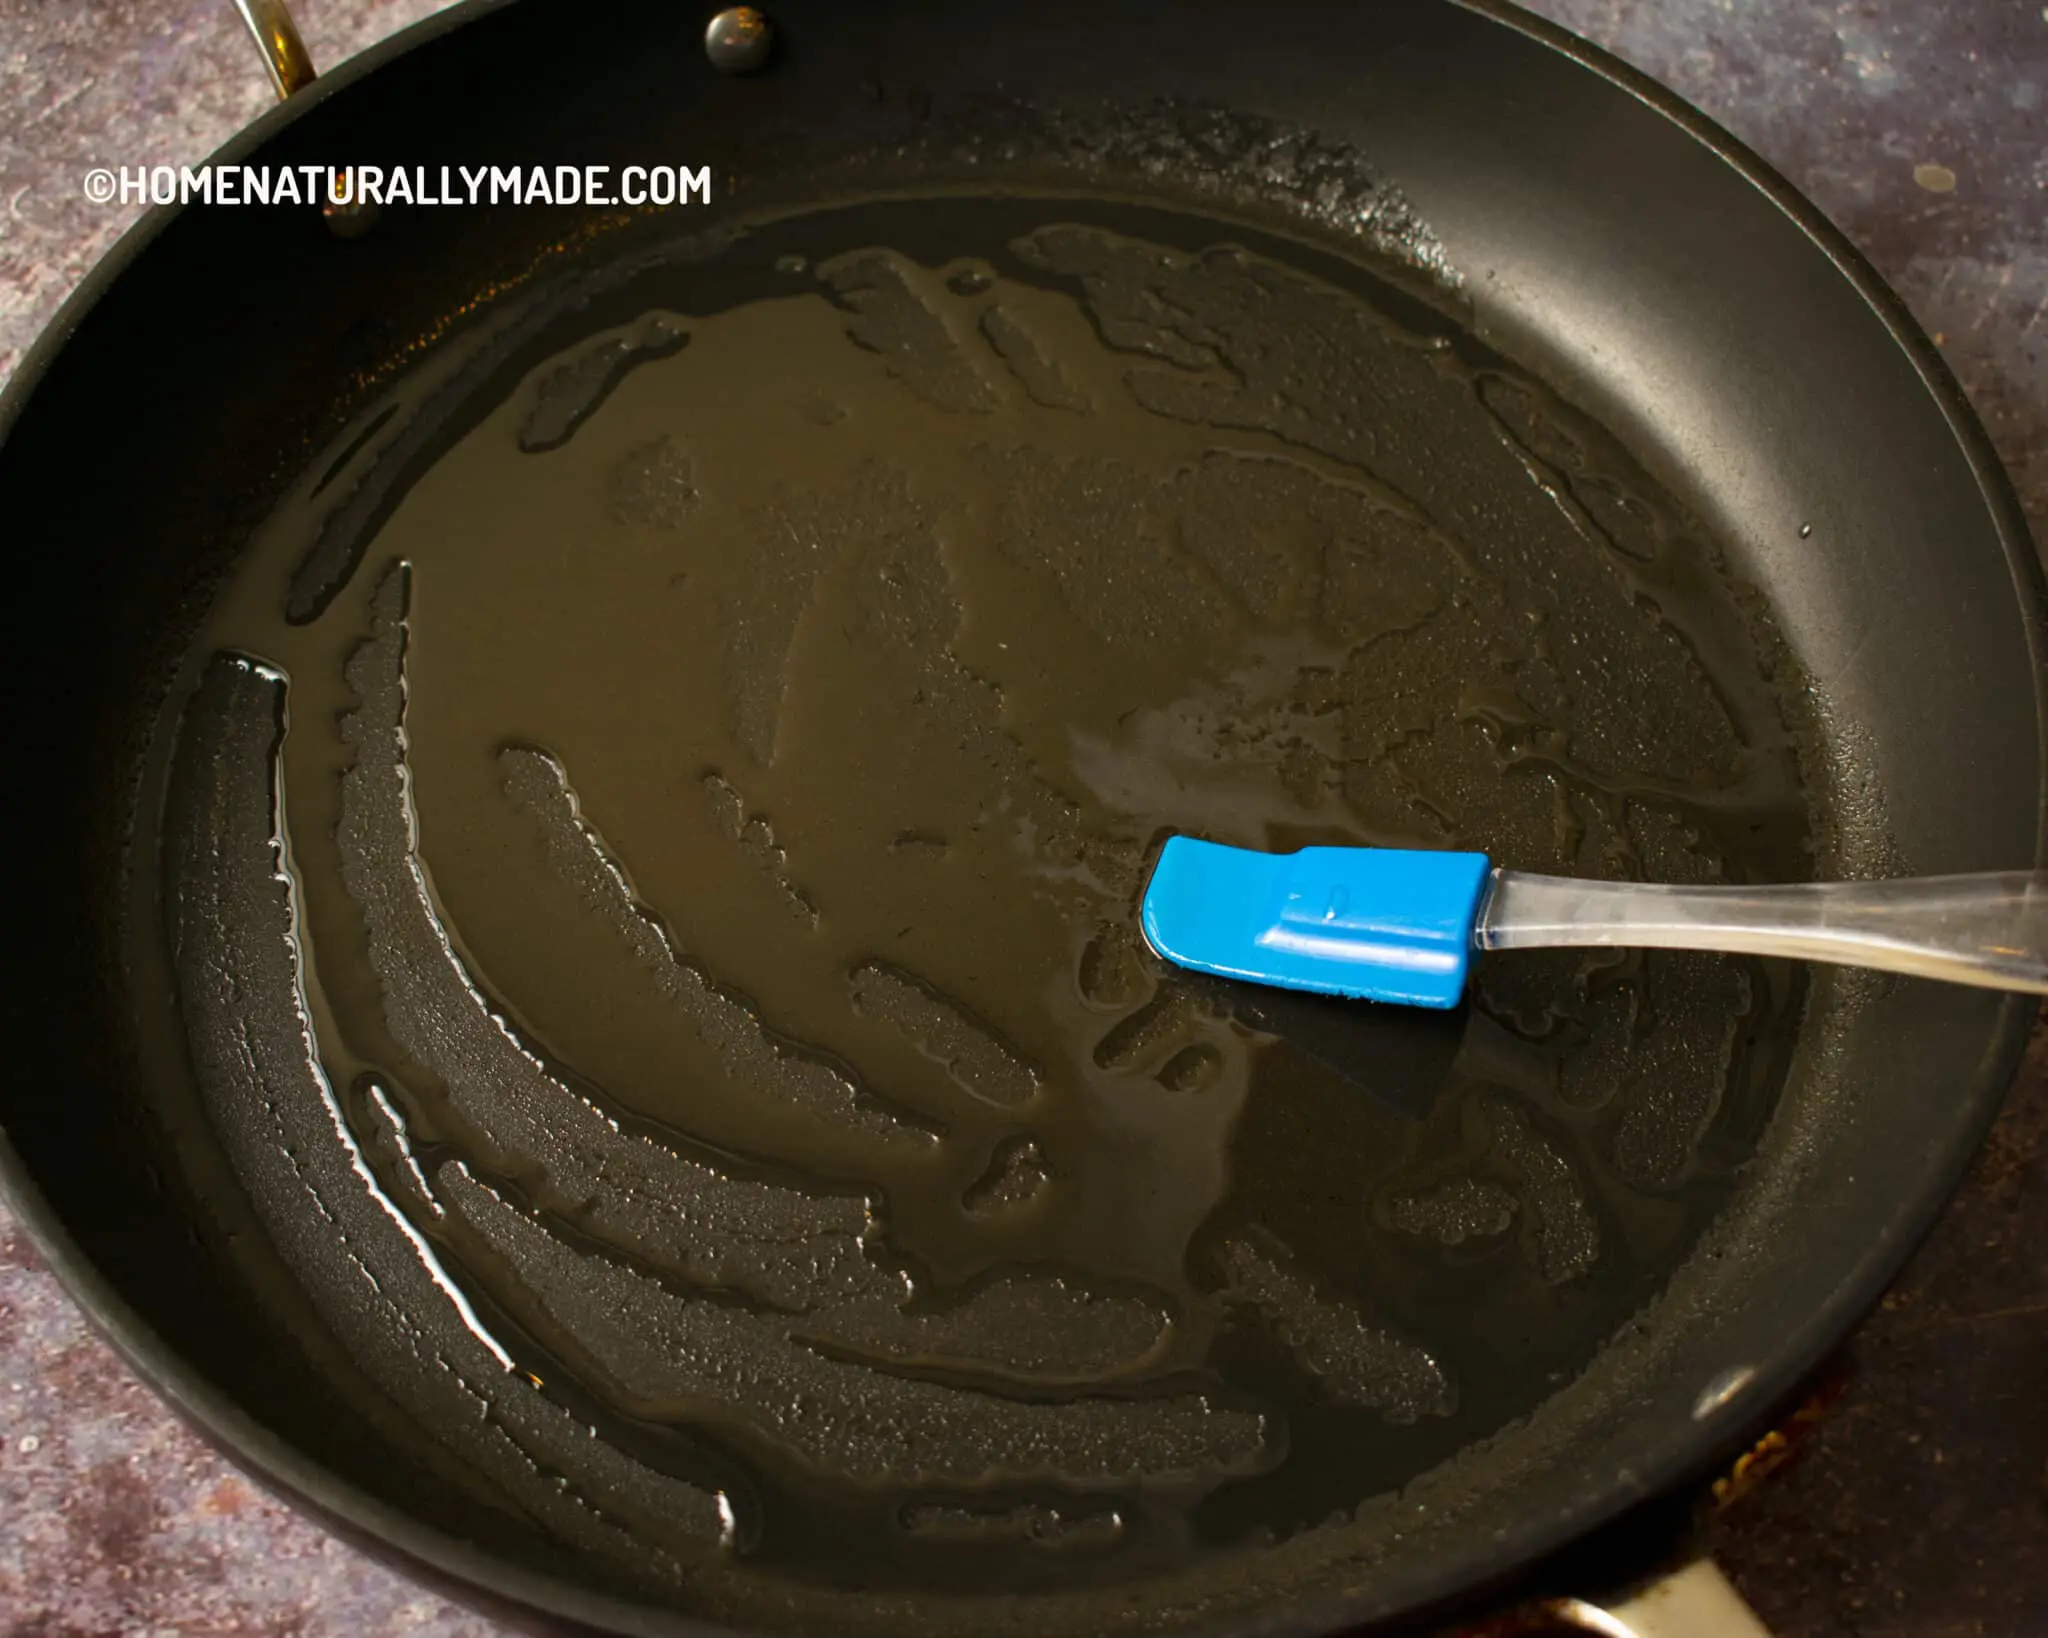 Use a mini spatula to spread the oil evenly across the pan